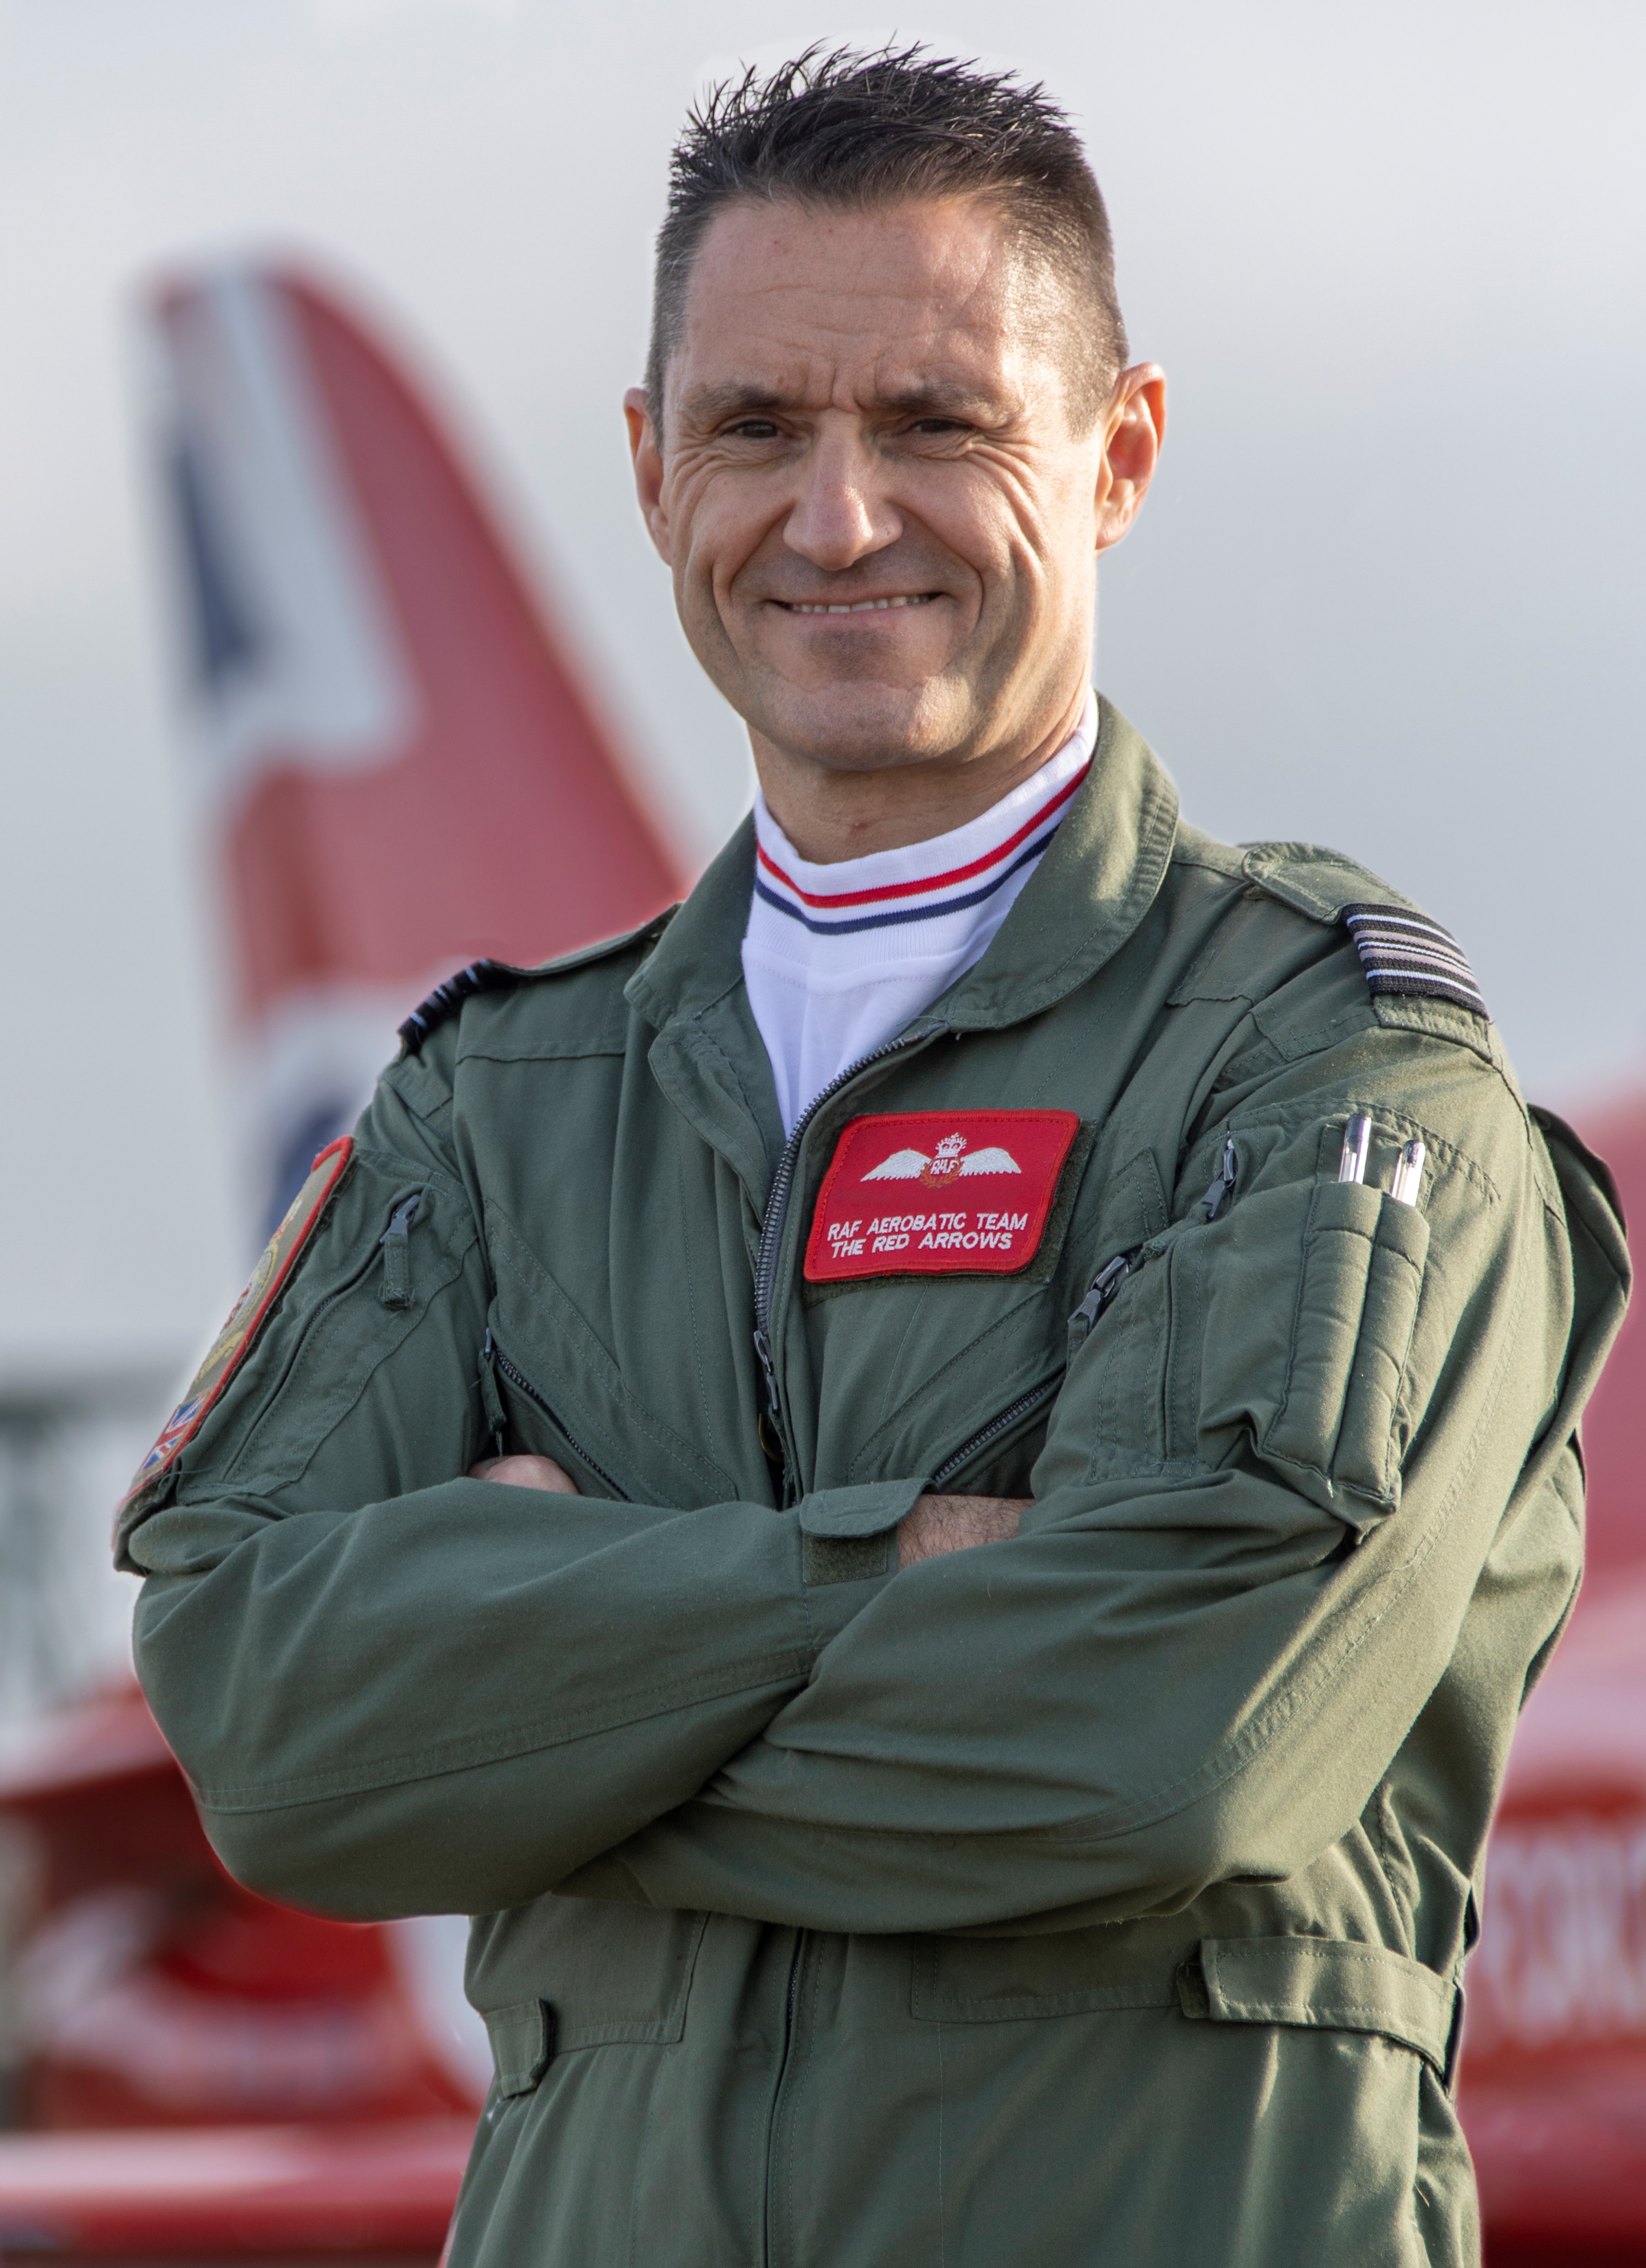 Sqn Ldr Graeme Muscat, who flew the Tornado aircraft on the frontline.